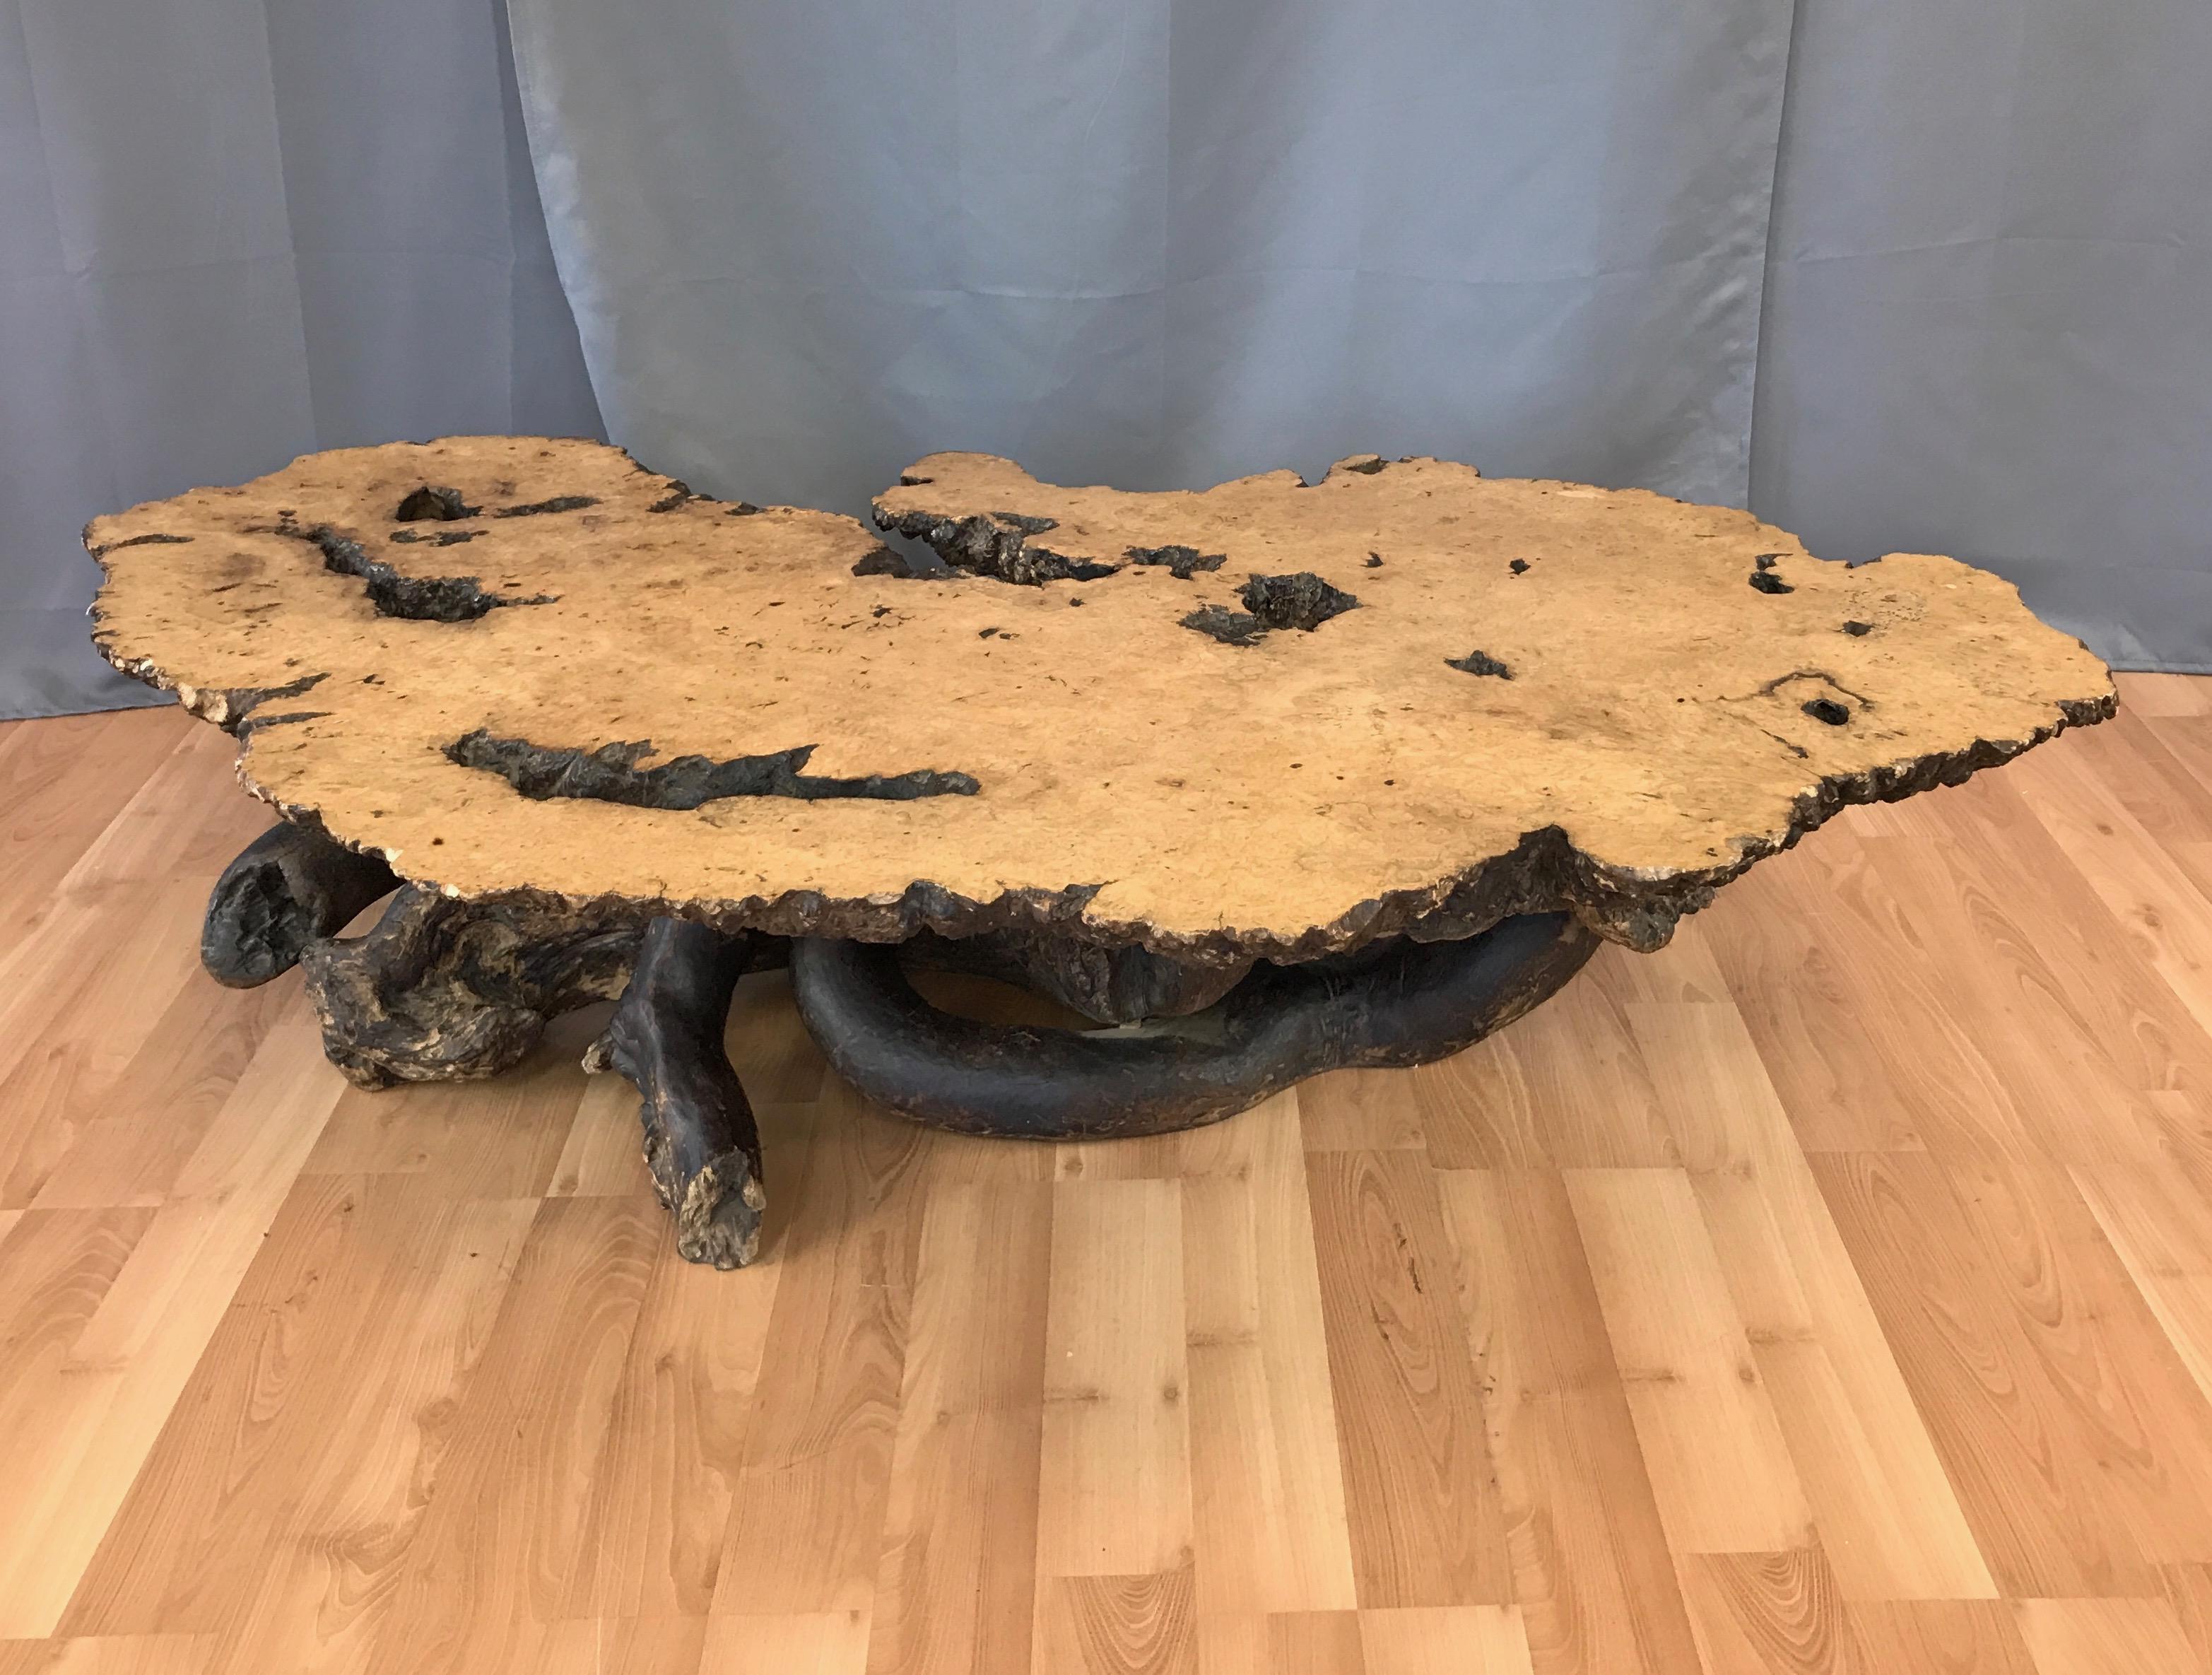 An uncommonly large and impressively crafted 1960s live edge birdseye maple burl slab coffee table on sculptural natural wood base.

Birdseye maple is an unpredictable phenomenon found in only about 1% of hard maple trees, making the expansive 64